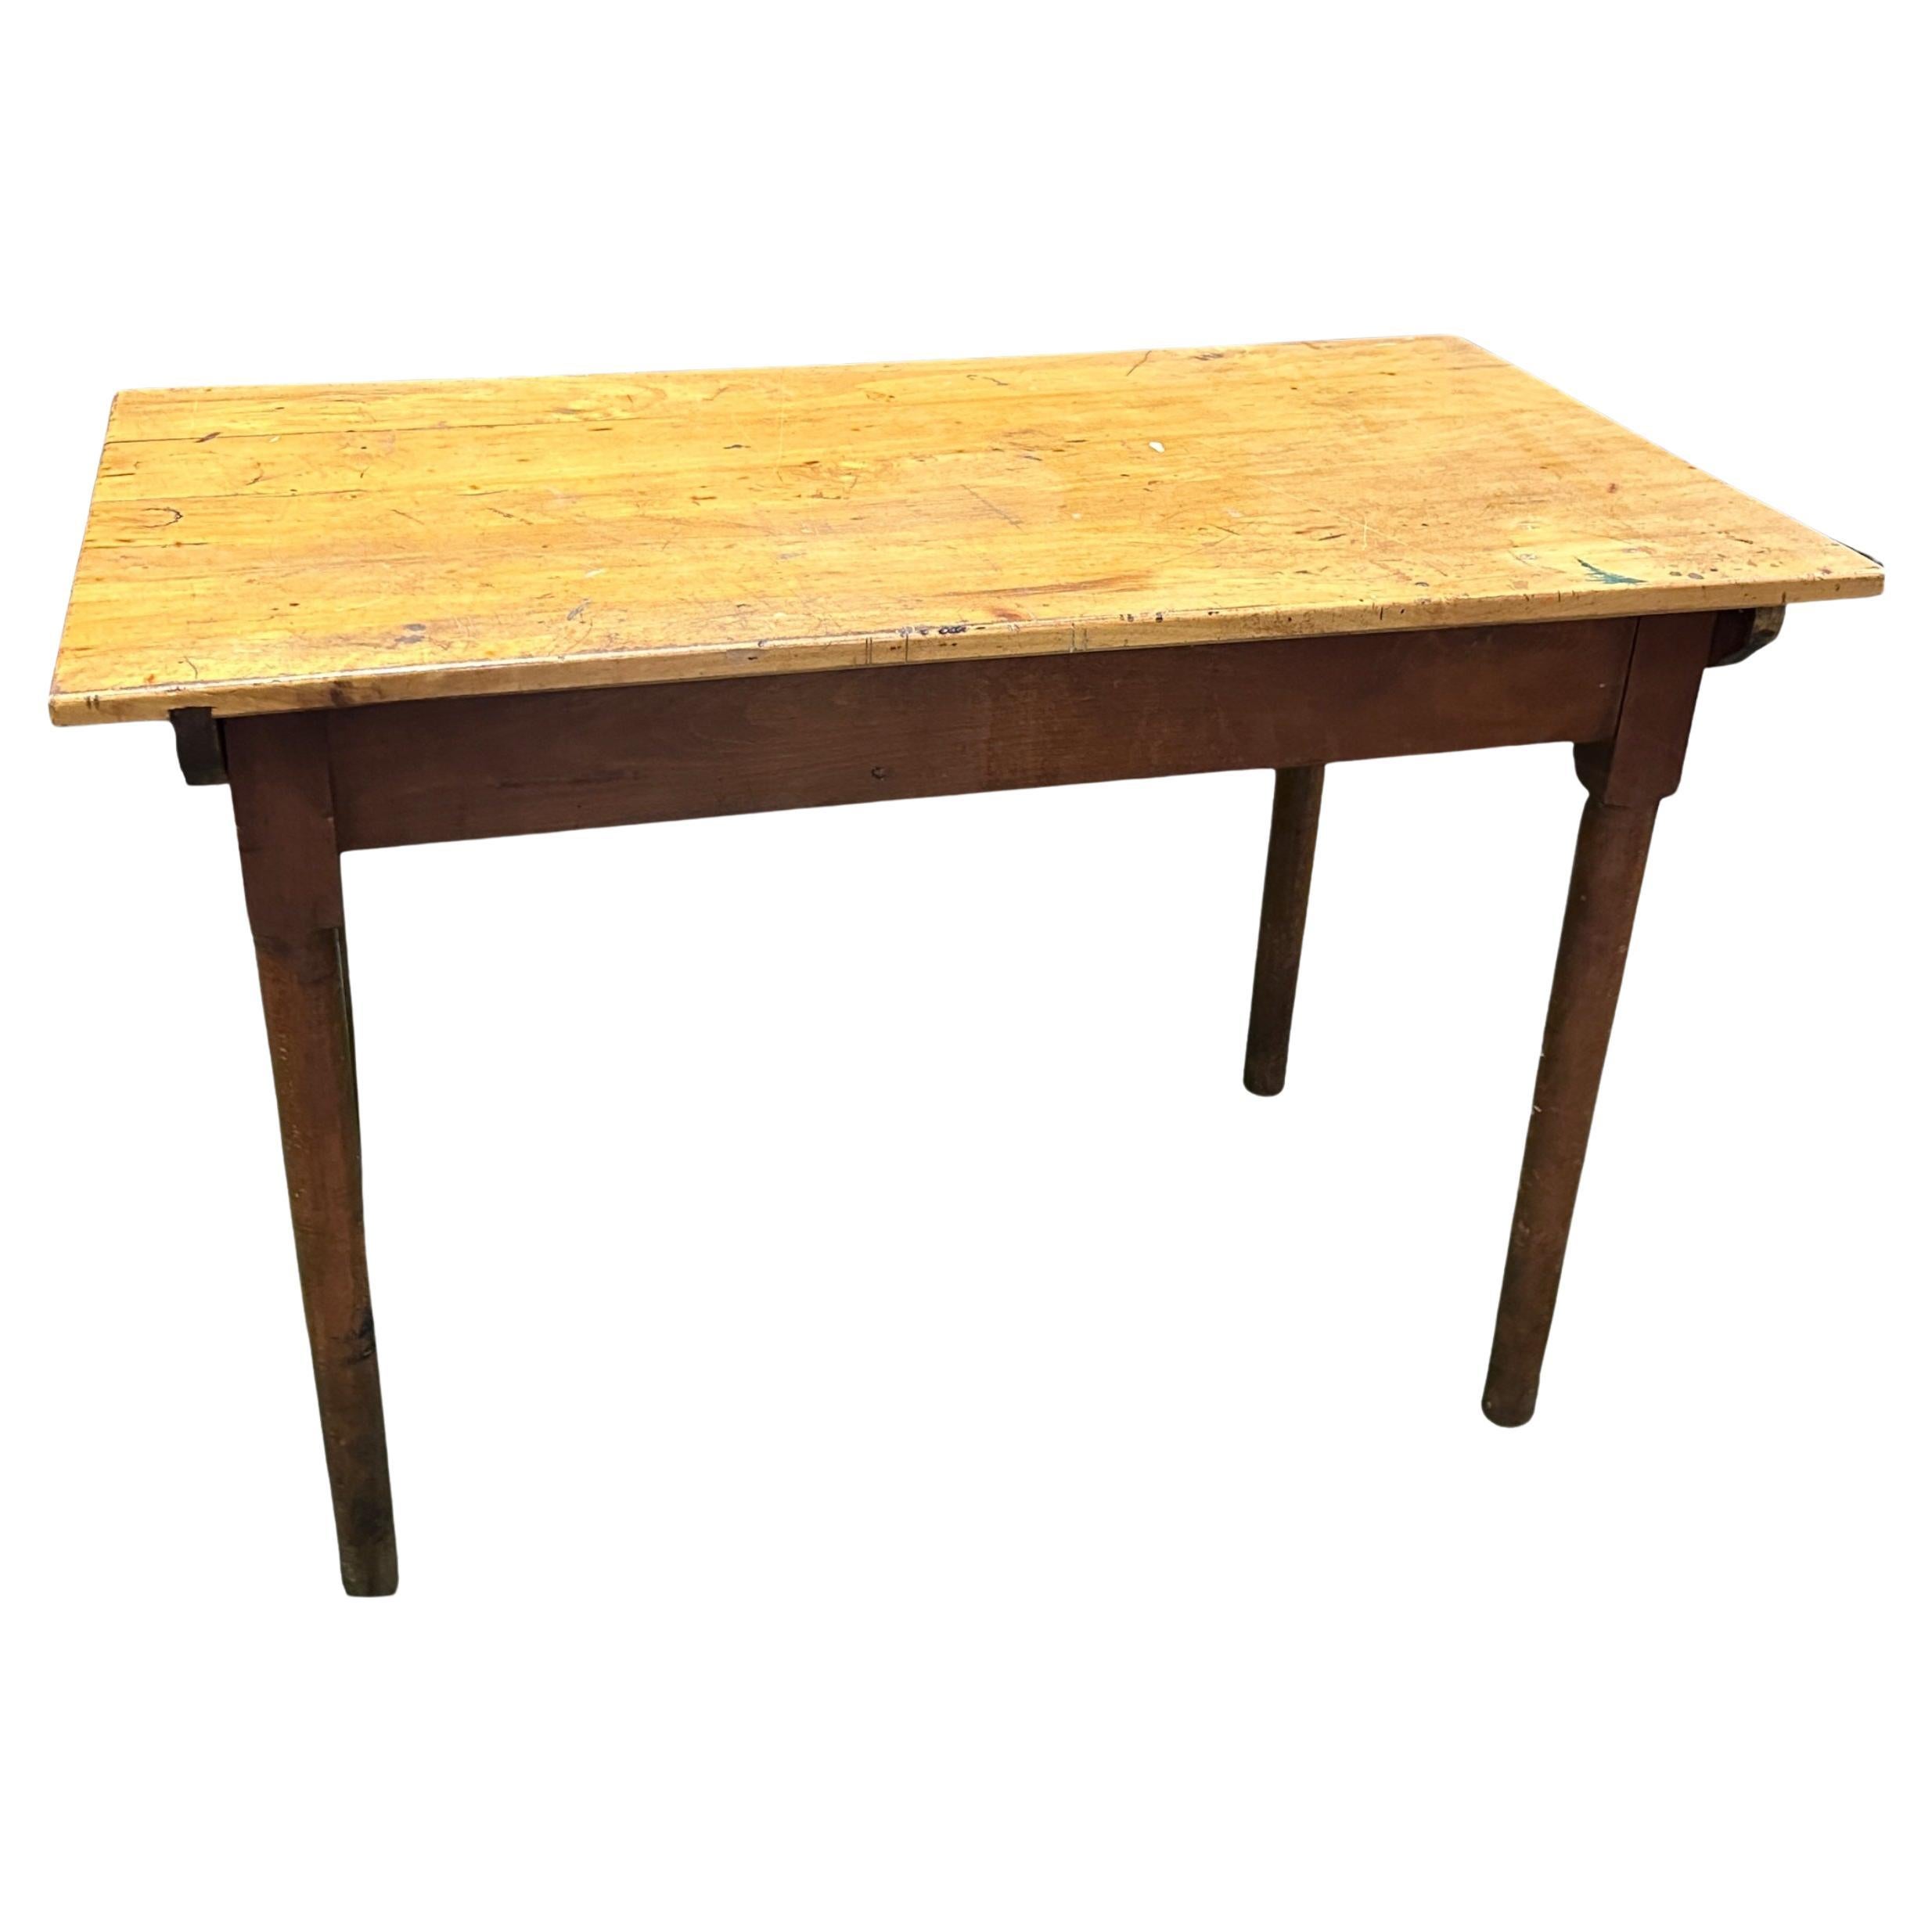 Folk Art Cottage Farm Tavern Table out of Humbser Brewery Fürth Bavaria 1950s For Sale